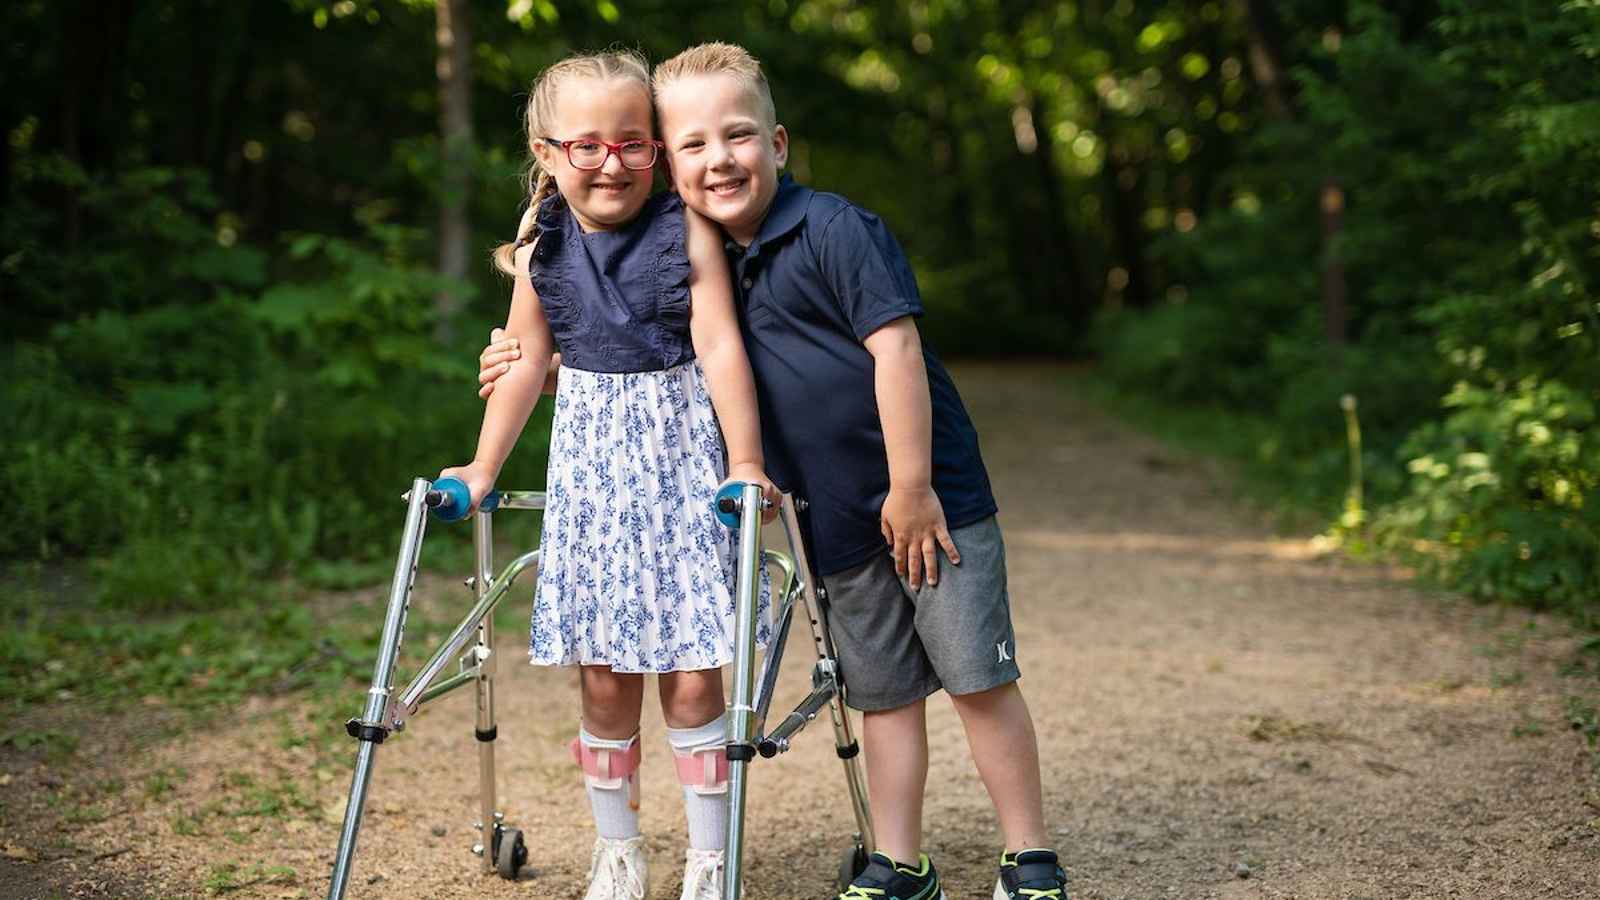 World Cerebral Palsy Day 2023: Date, History, Facts, How to Observe